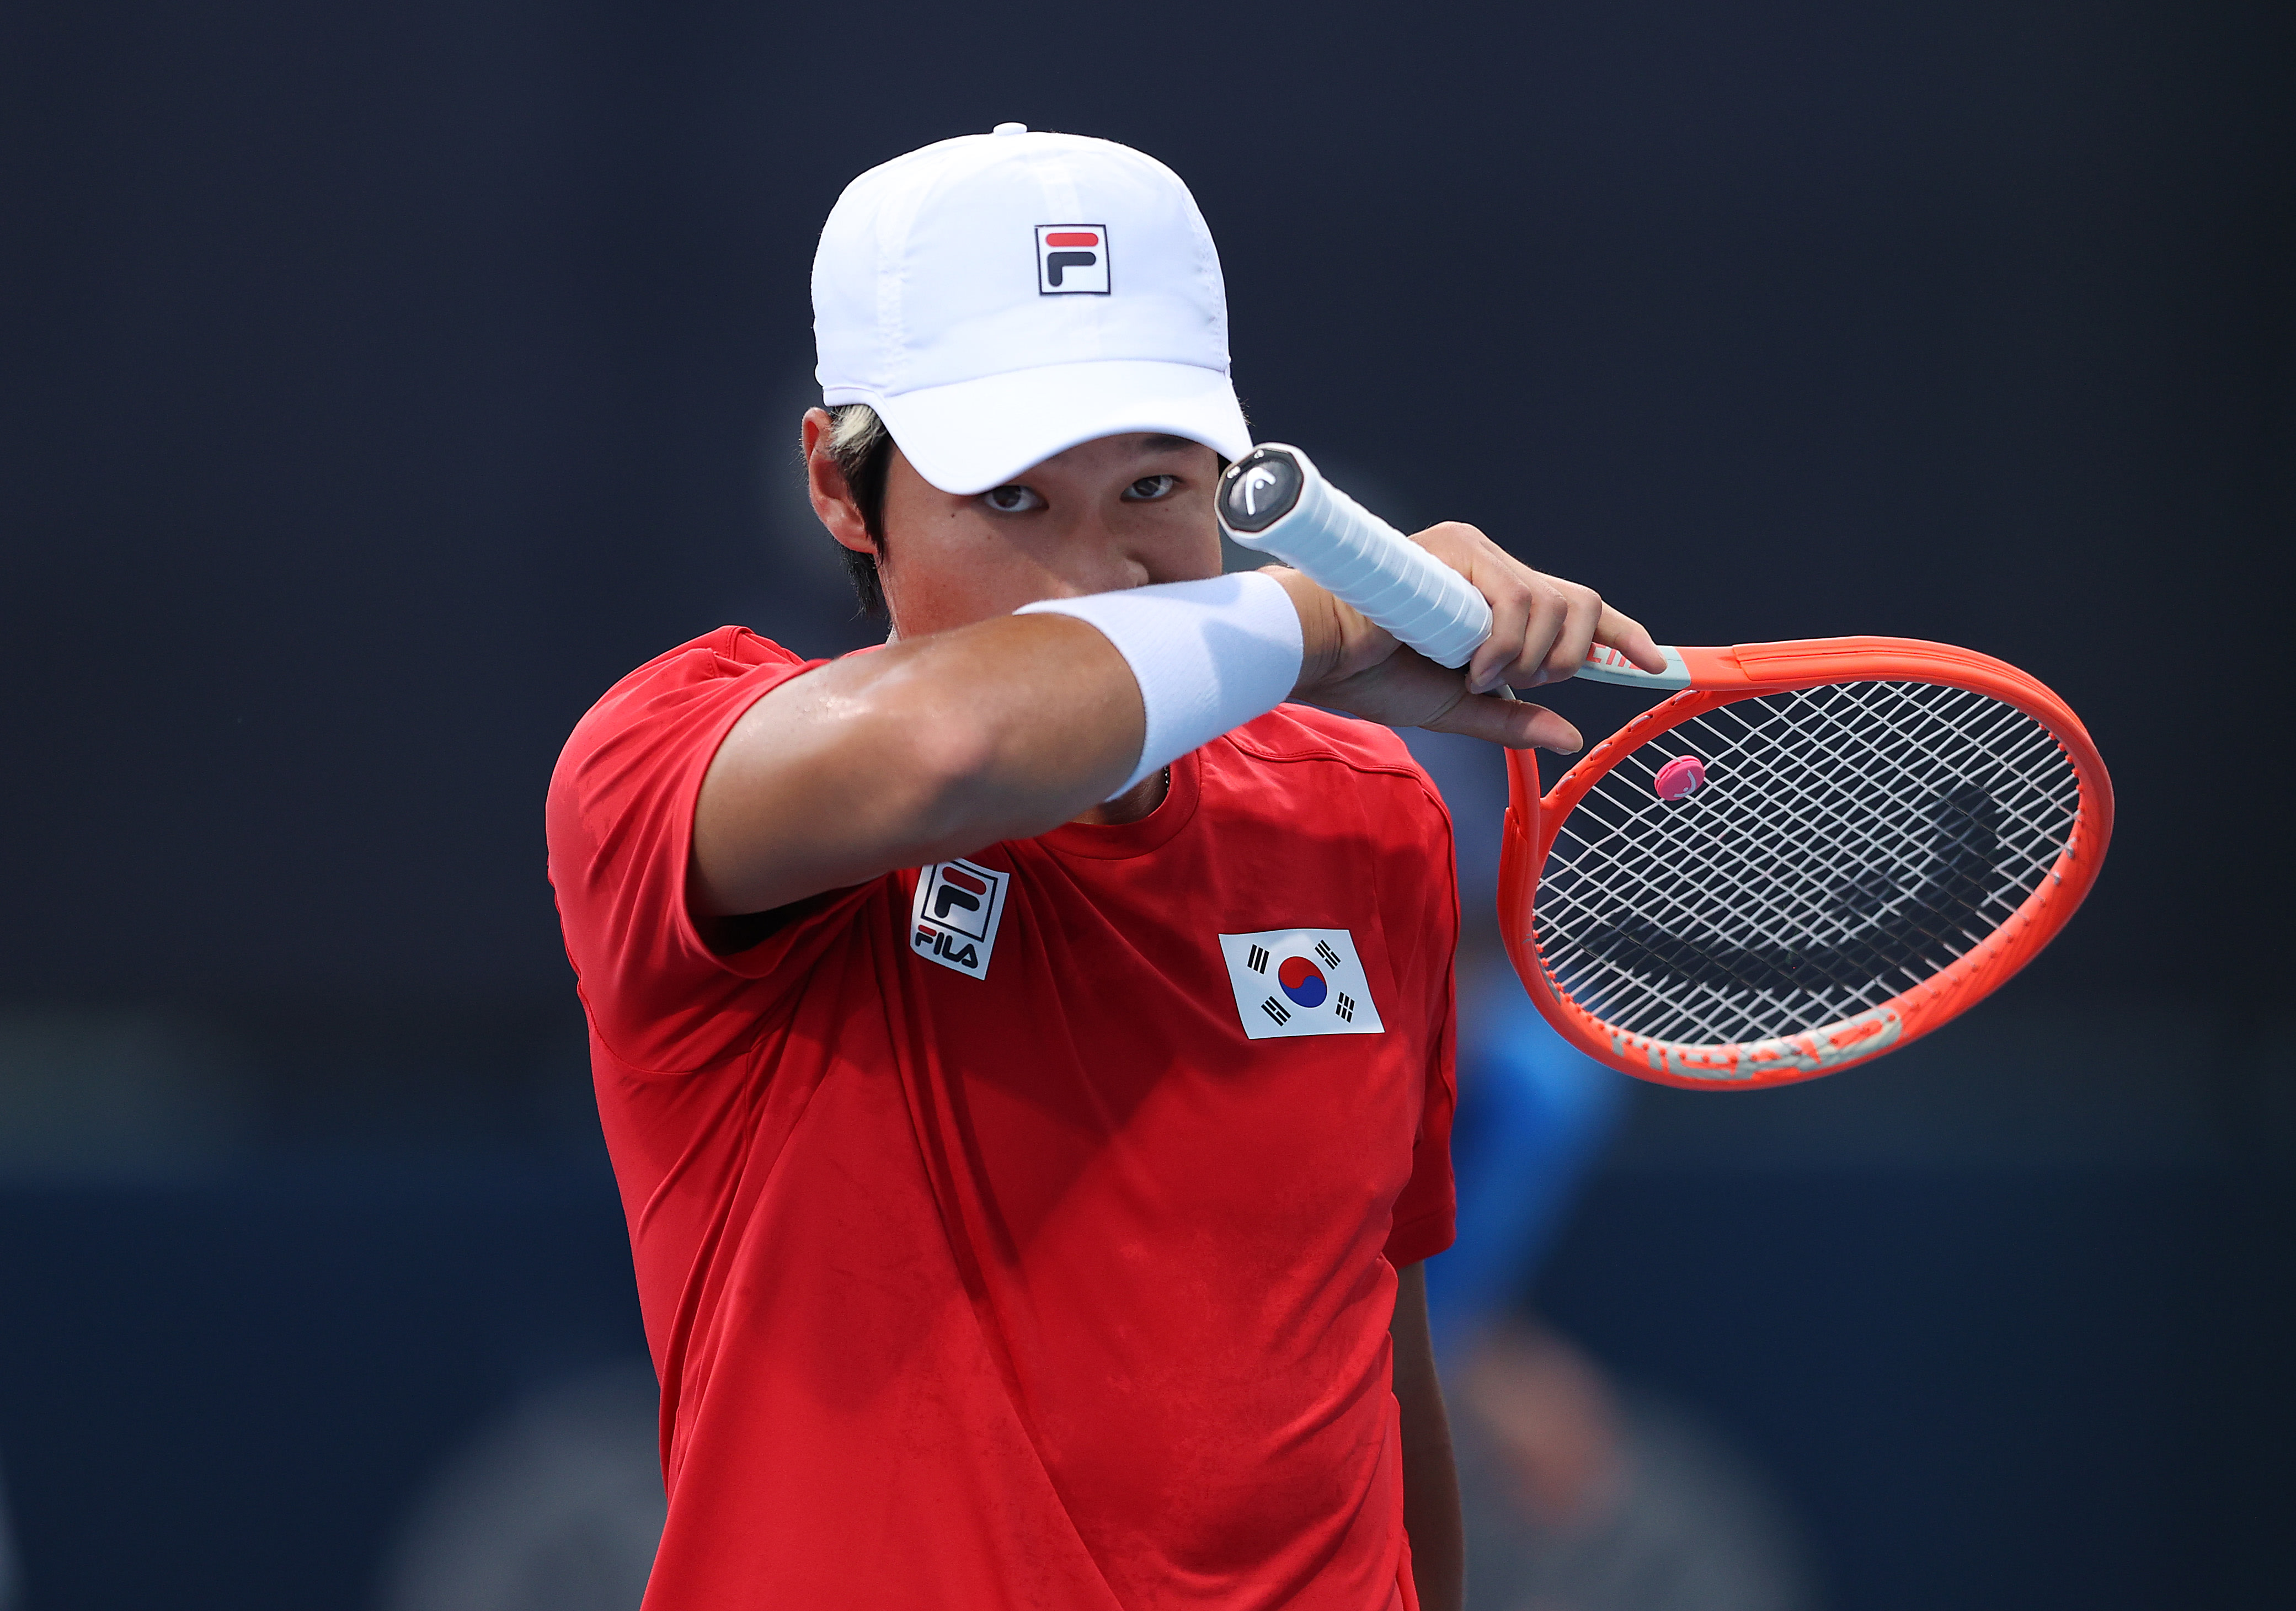 Kwon wins Astana Open to end South Korean wait for ATP title